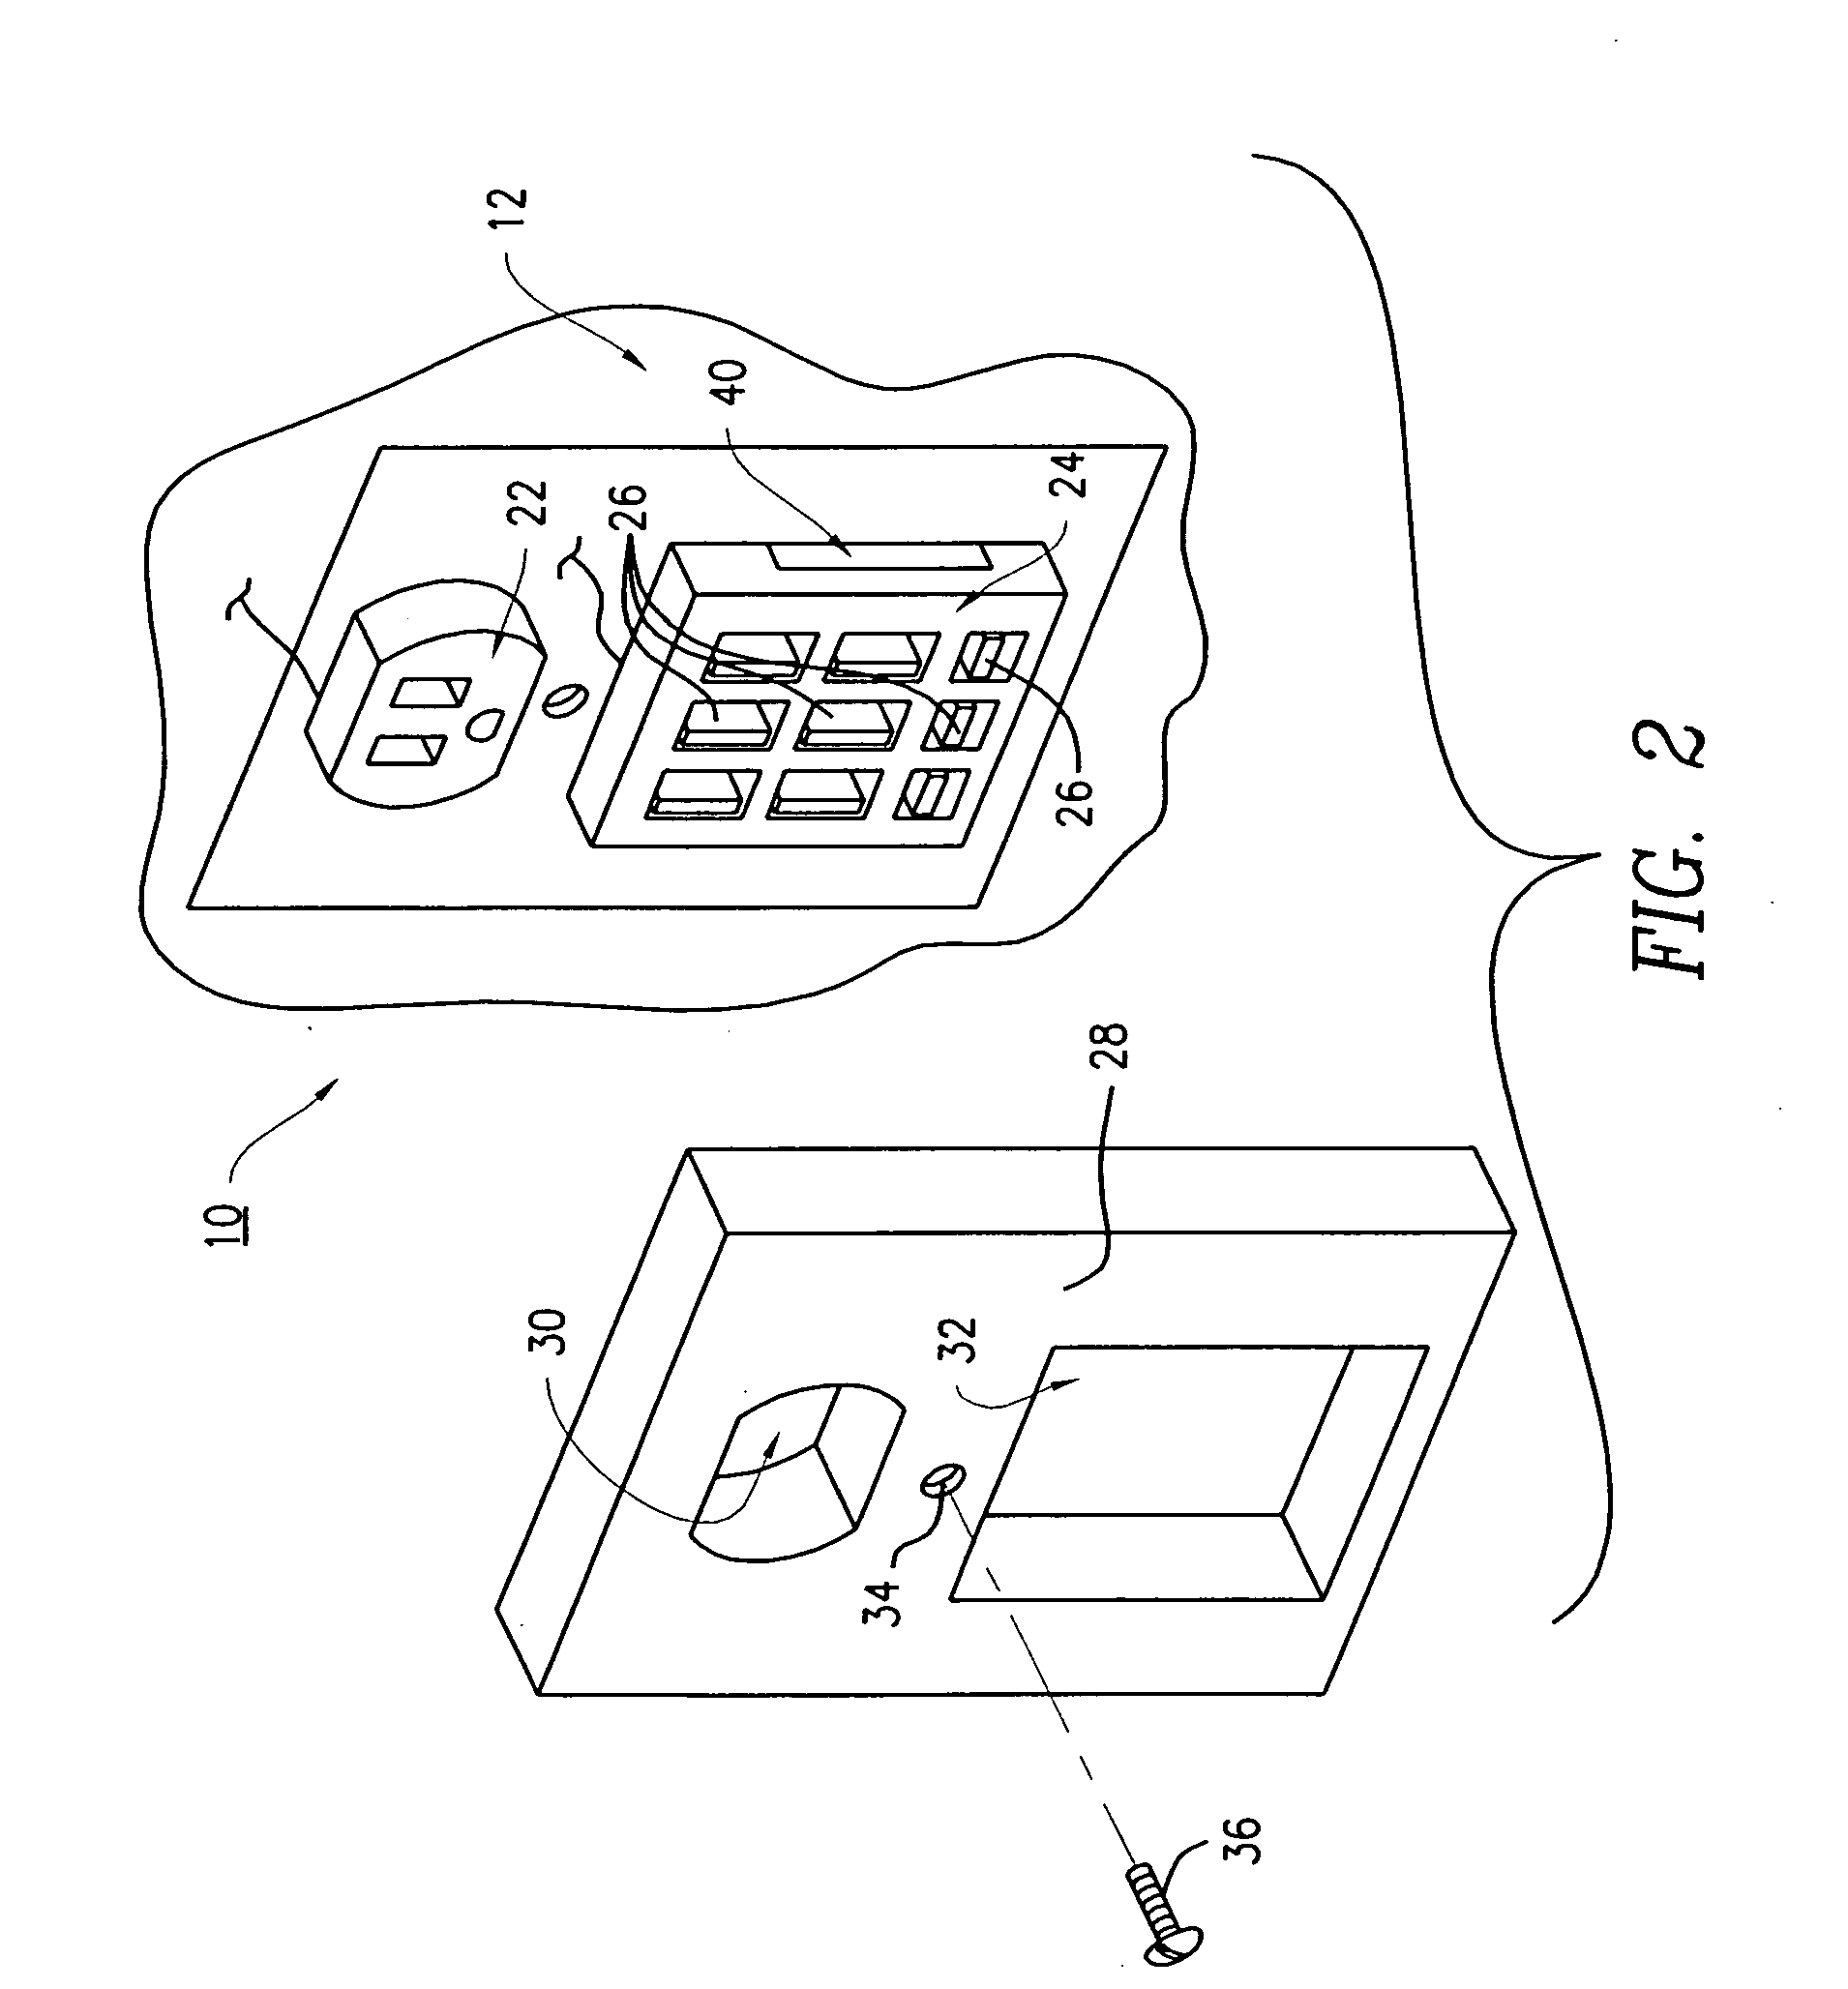 USB connector devices for charging